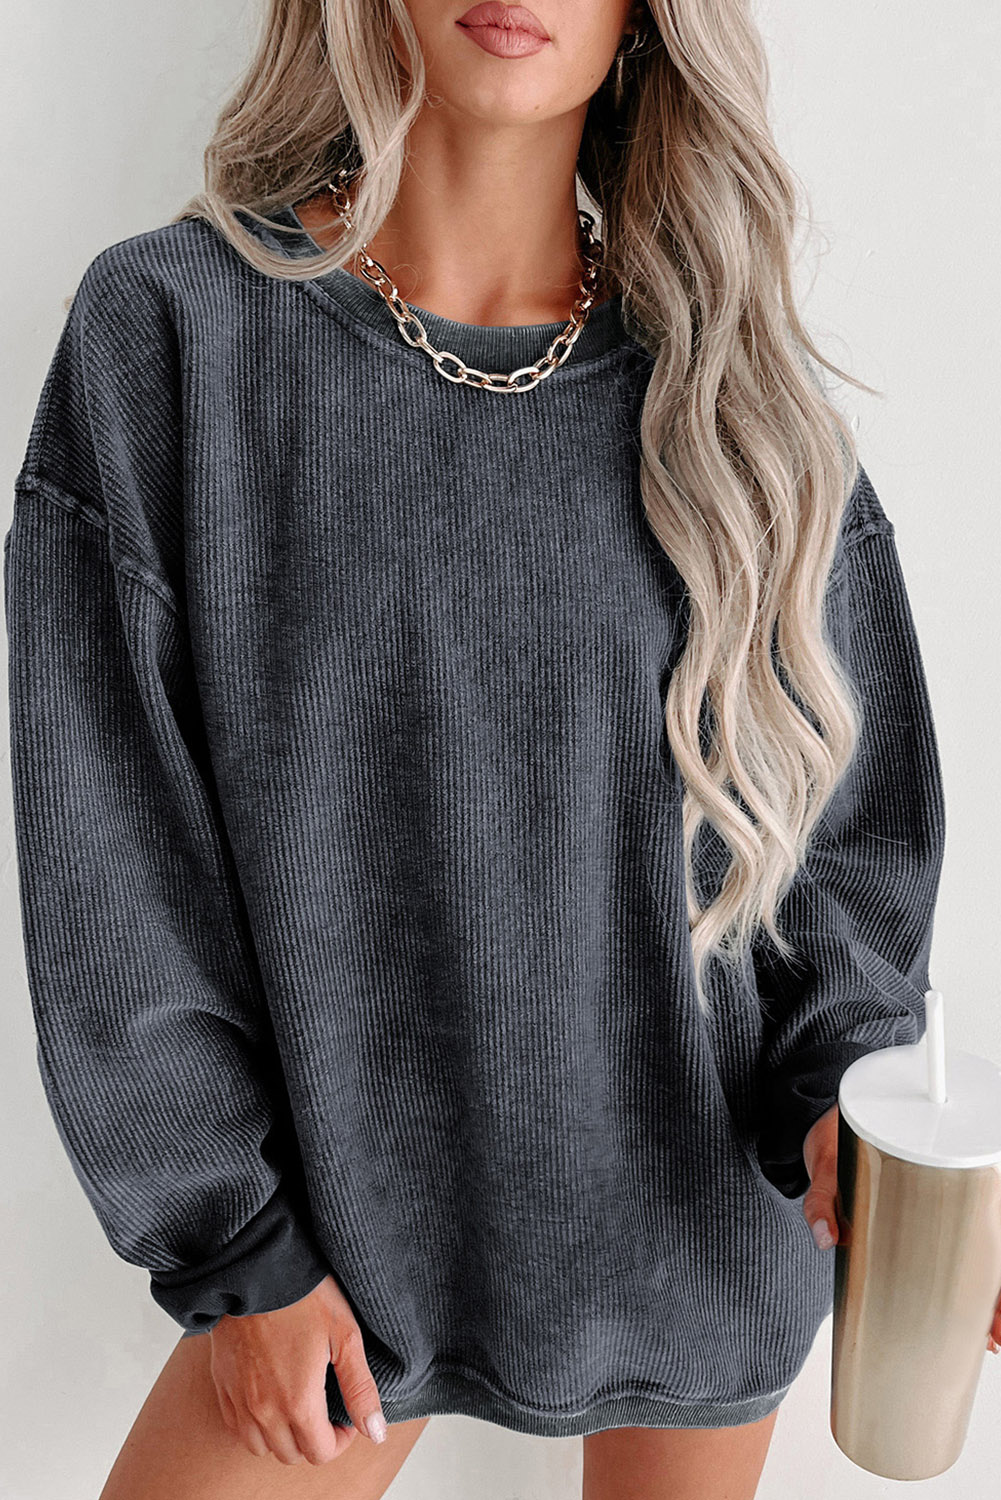 Shewin Wholesale Western Clothing  Plain Gray Solid Ribbed Knit Round Neck Pullover Sweatshirt